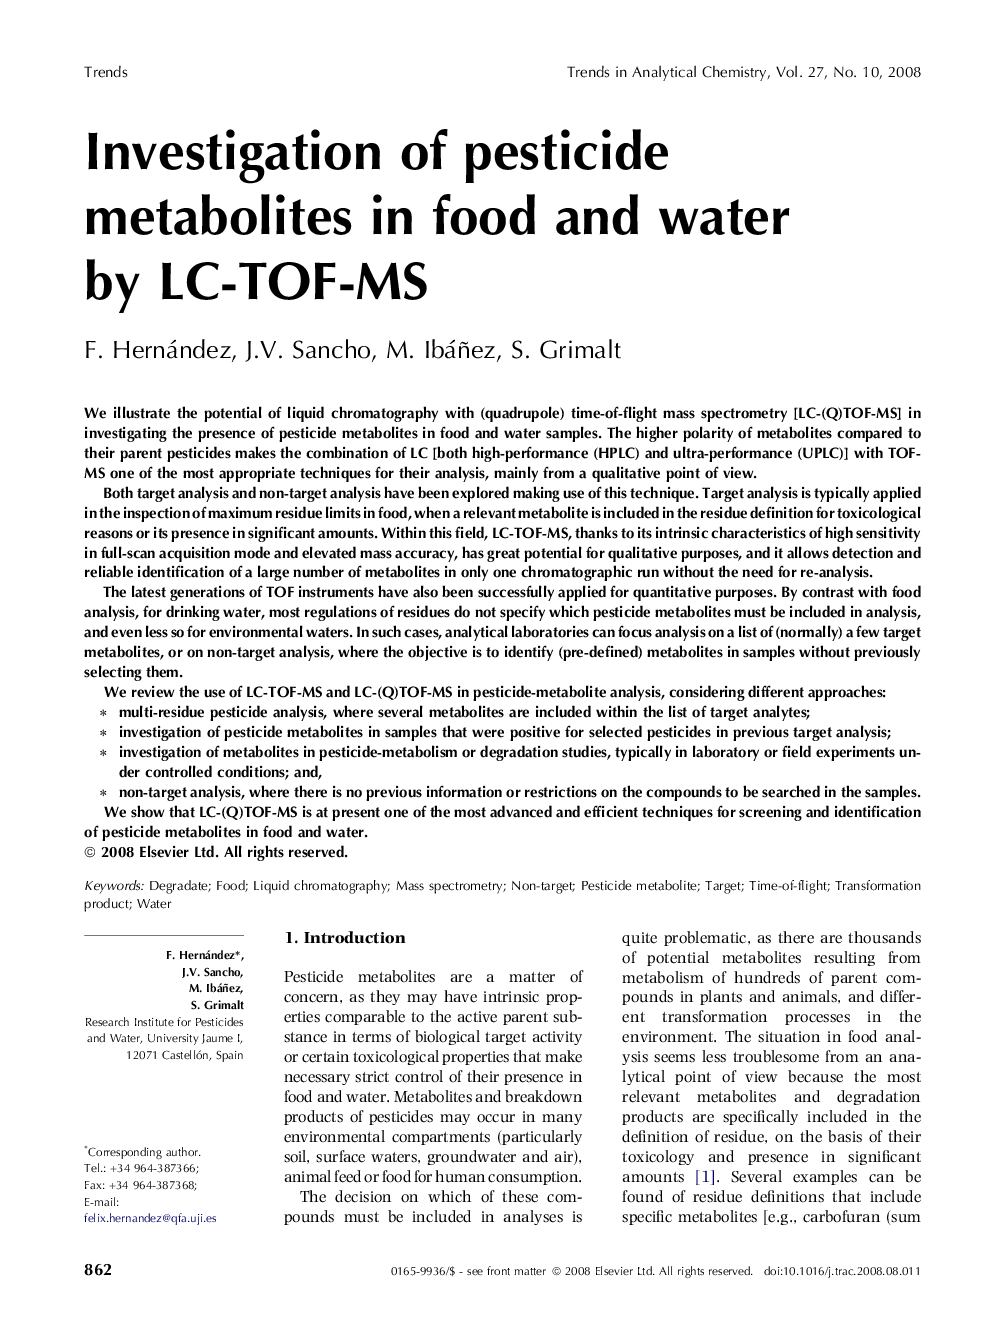 Investigation of pesticide metabolites in food and water by LC-TOF-MS